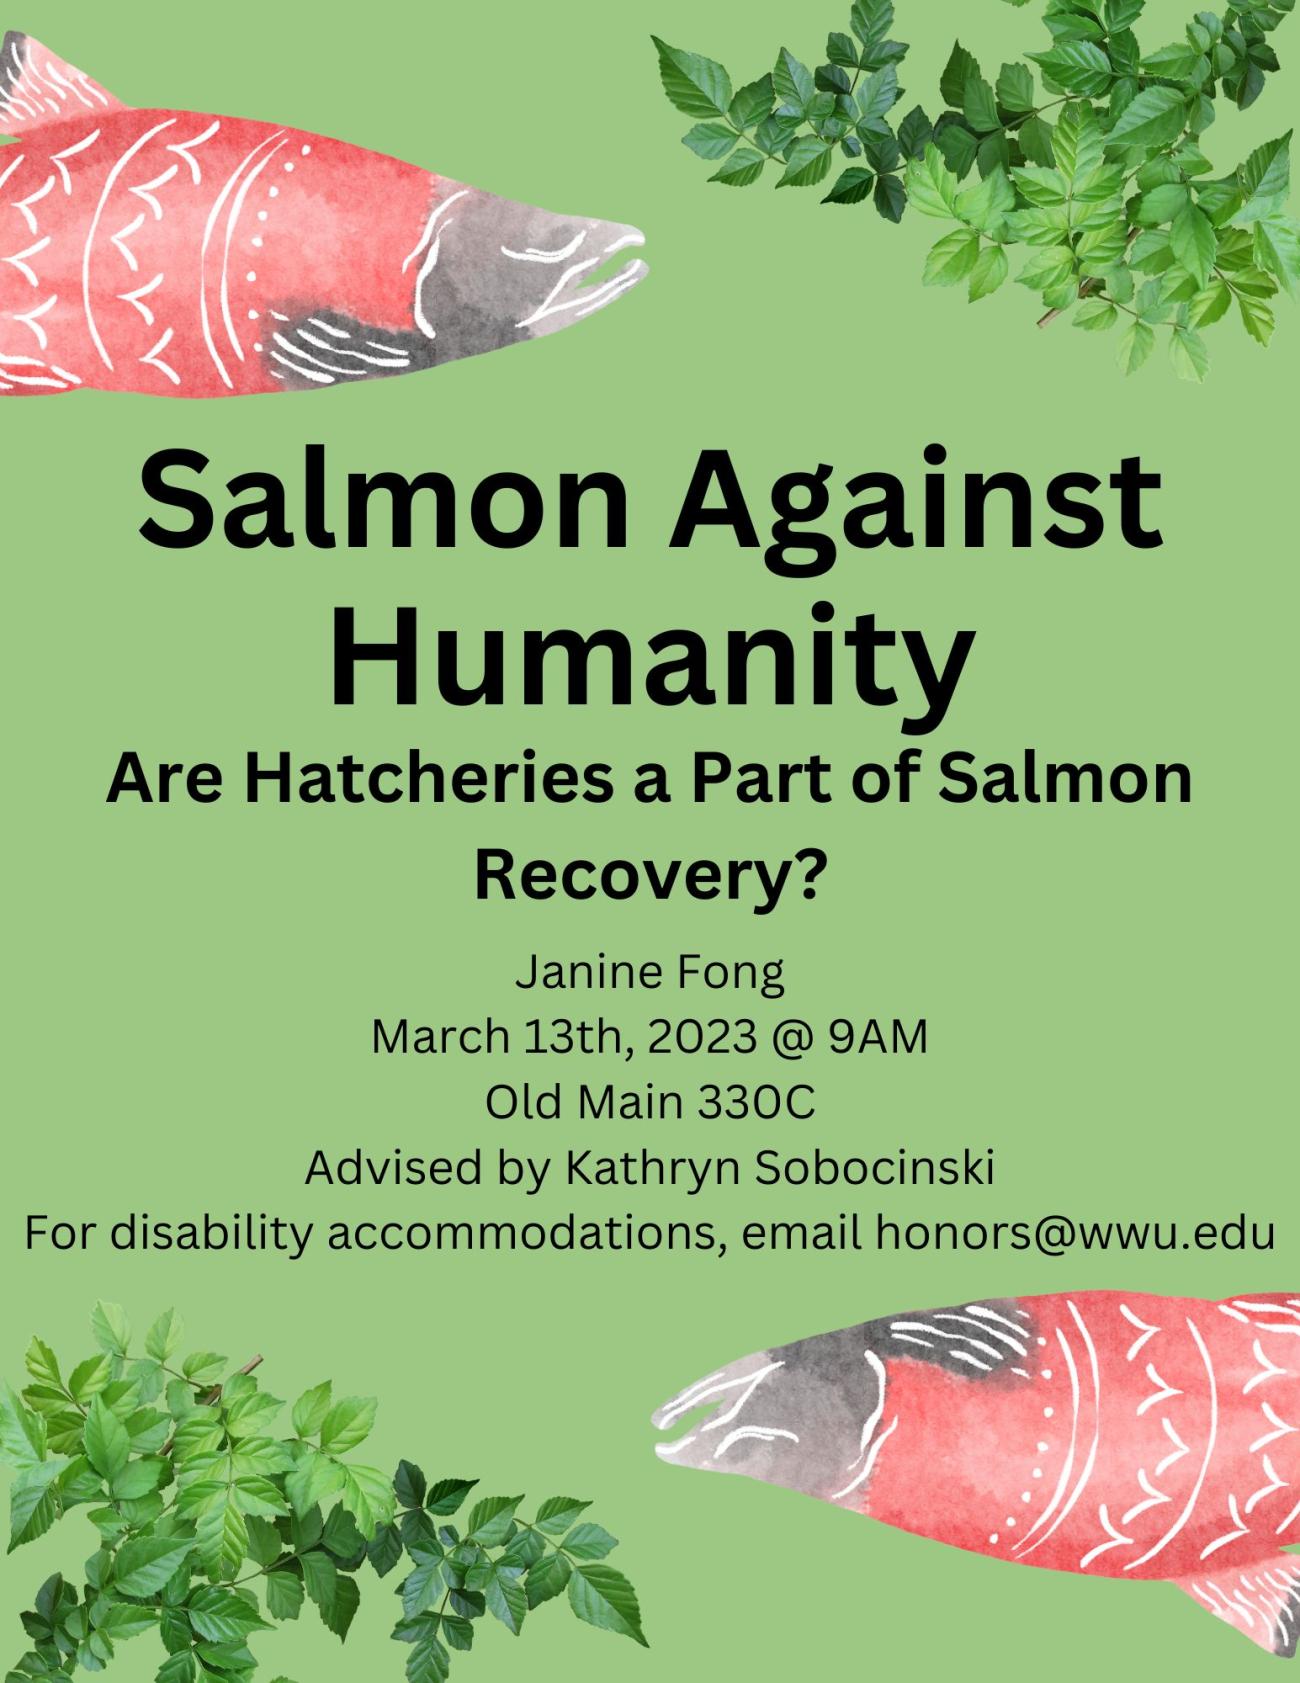 A green poster with two illustrations of salmon and two plants. The text reads: "Salmon Against Humanity. Are hatcheries a part of salmon recovery? By Janine Fong, presented on March 13th, 2023 at 9am in Old Main, room 330C. Advised by Kathryn Sobocinski. For disability accommodations, please email honors@wwu.edu."